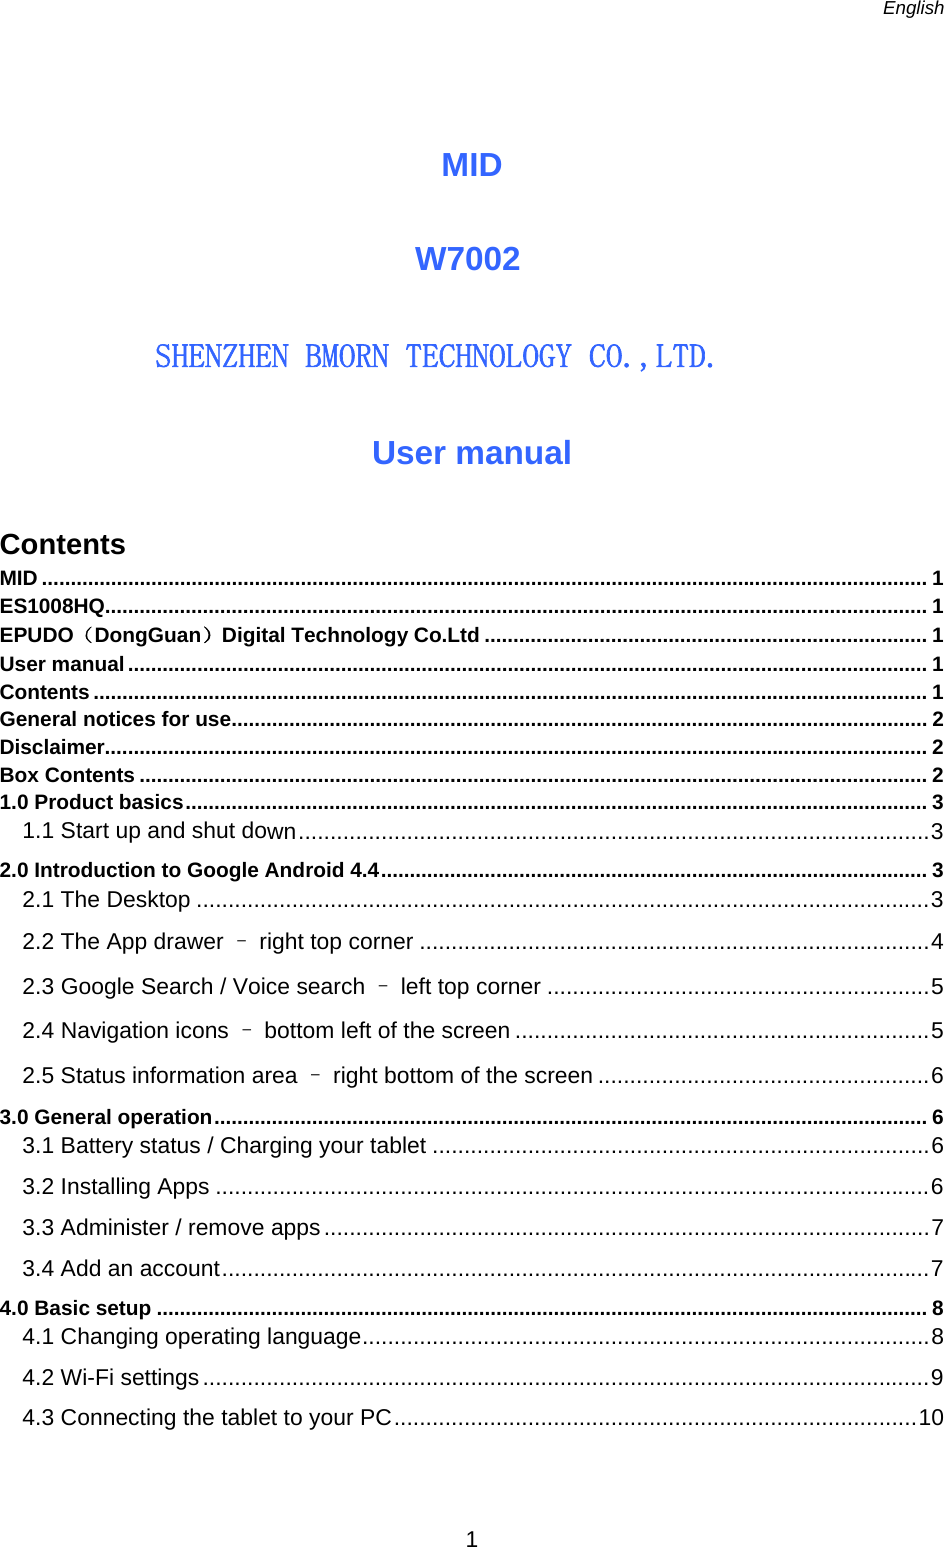   English   1  MID    W7002   　　　　ＳＨＥＮＺＨＥＮ　ＢＭＯＲＮ　ＴＥＣＨＮＯＬＯＧＹ　ＣＯ．，ＬＴＤ．  User manual Contents MID .......................................................................................................................................................... 1 ES1008HQ............................................................................................................................................... 1 EPUDO（DongGuan）Digital Technology Co.Ltd ............................................................................. 1 User manual ........................................................................................................................................... 1 Contents ................................................................................................................................................. 1 General notices for use ......................................................................................................................... 2 Disclaimer............................................................................................................................................... 2 Box Contents ......................................................................................................................................... 2 1.0 Product basics ................................................................................................................................. 3 1.1 Start up and shut down ................................................................................................... 3 2.0 Introduction to Google Android 4.4 ............................................................................................... 3 2.1 The Desktop ................................................................................................................... 3 2.2 The App drawer – right top corner ................................................................................ 4 2.3 Google Search / Voice search – left top corner ............................................................ 5 2.4 Navigation icons – bottom left of the screen ................................................................. 5 2.5 Status information area – right bottom of the screen .................................................... 6 3.0 General operation ............................................................................................................................ 6 3.1 Battery status / Charging your tablet .............................................................................. 6 3.2 Installing Apps ................................................................................................................ 6 3.3 Administer / remove apps ............................................................................................... 7 3.4 Add an account ............................................................................................................... 7 4.0 Basic setup ...................................................................................................................................... 8 4.1 Changing operating language ......................................................................................... 8 4.2 Wi-Fi settings .................................................................................................................. 9 4.3 Connecting the tablet to your PC .................................................................................. 10   